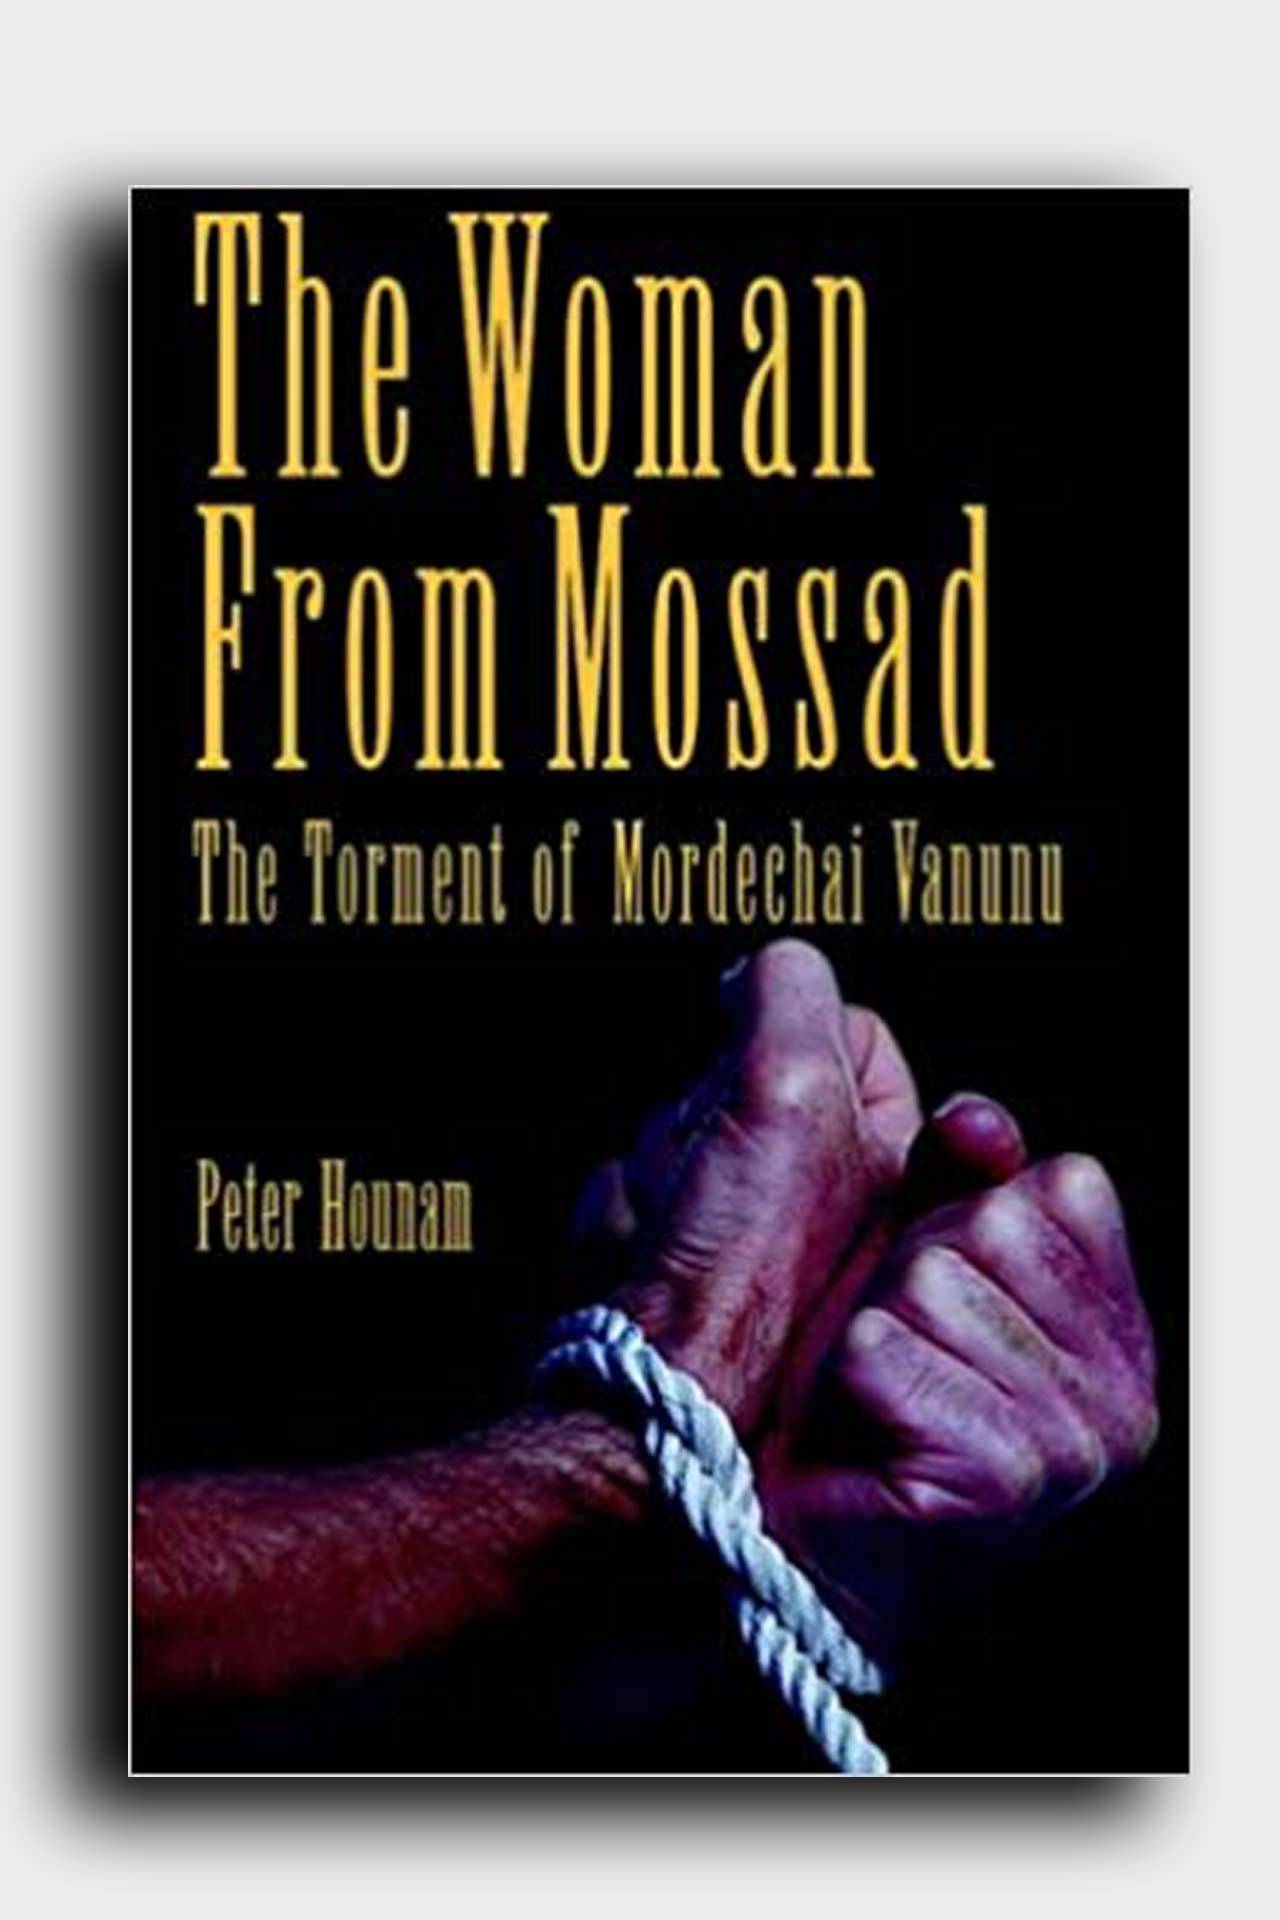 The Woman from Mossad book by Peter Hounam